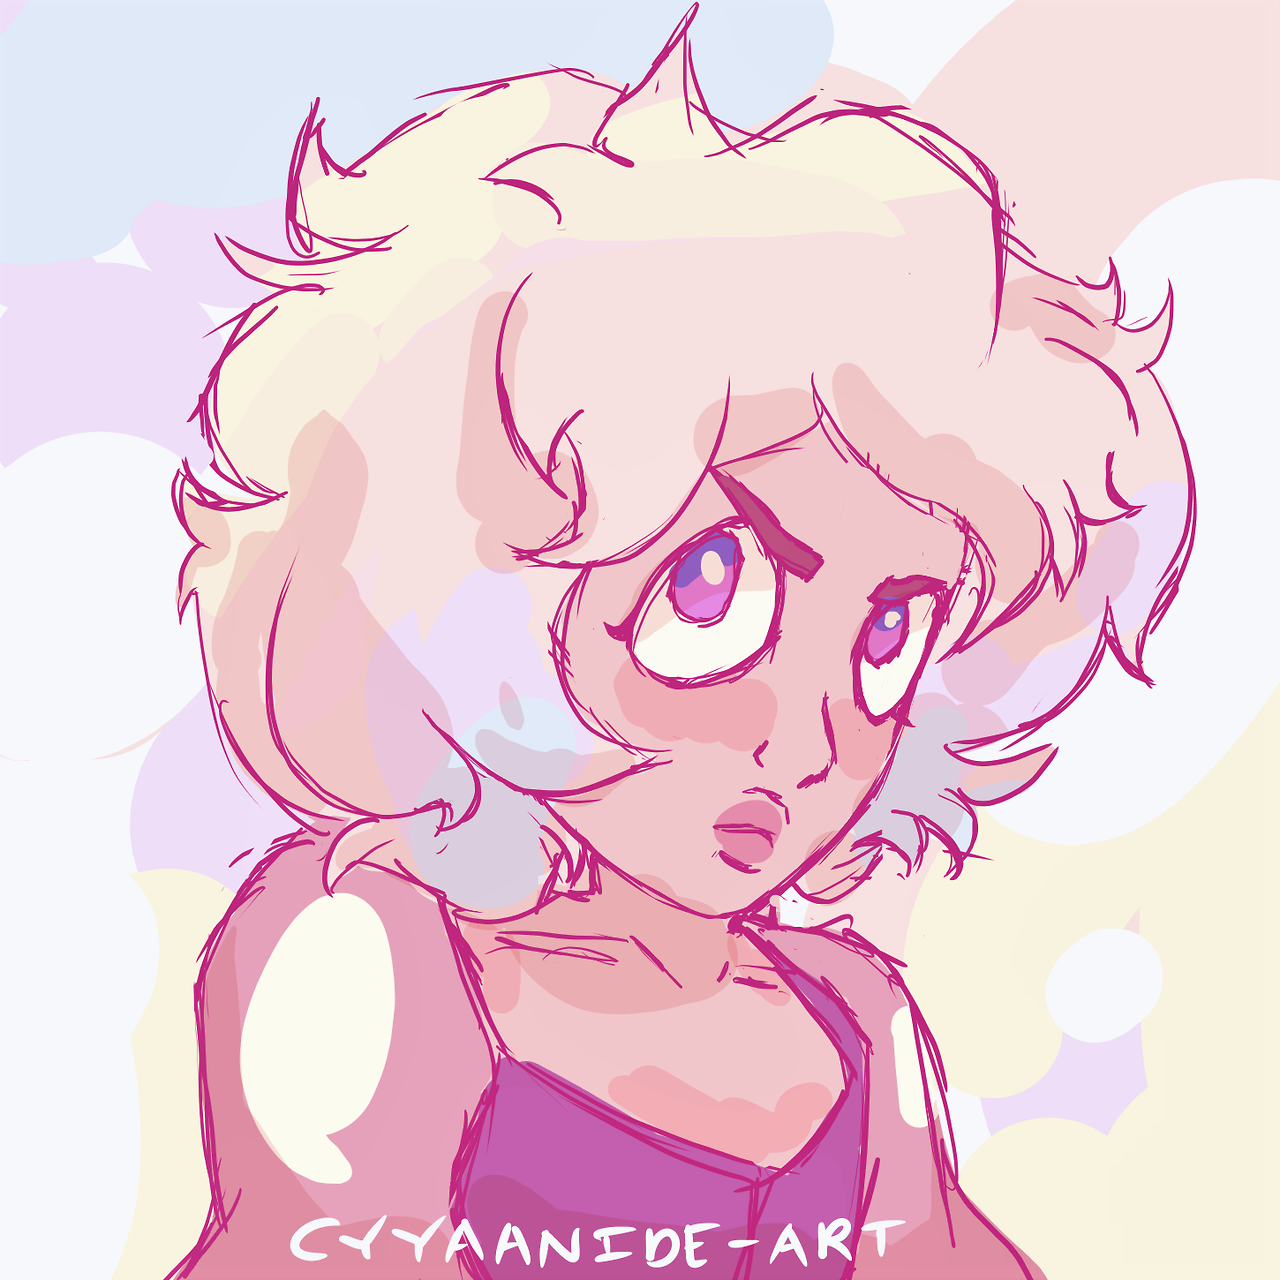 it’s a pastel pink diamond bc i think she can be gentle (on the inside at least)